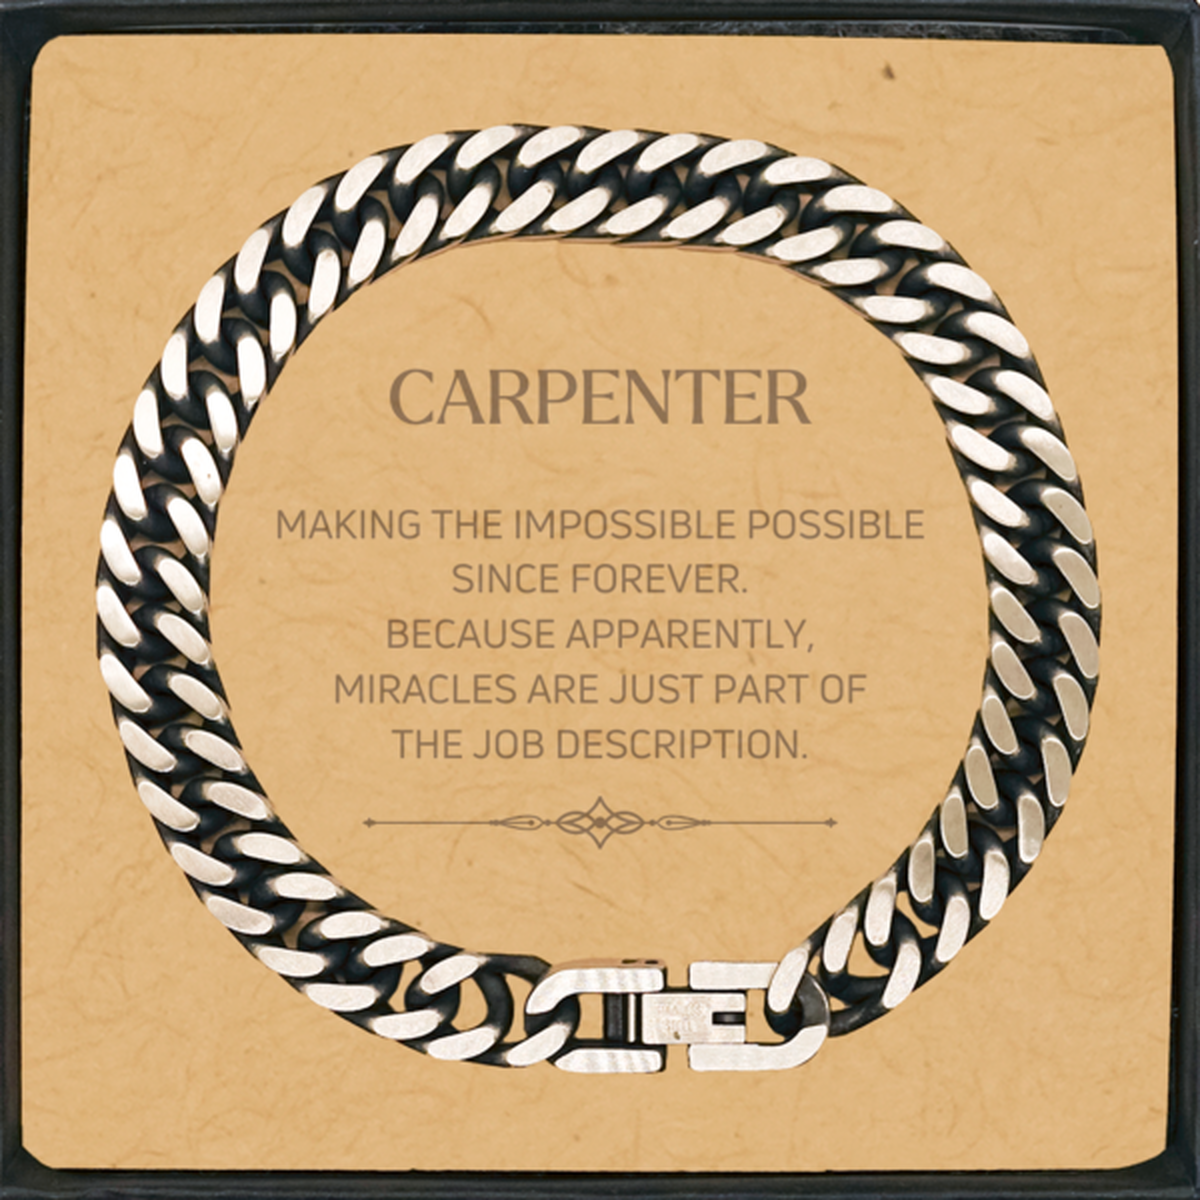 Funny Carpenter Gifts, Miracles are just part of the job description, Inspirational Birthday Cuban Link Chain Bracelet For Carpenter, Men, Women, Coworkers, Friends, Boss